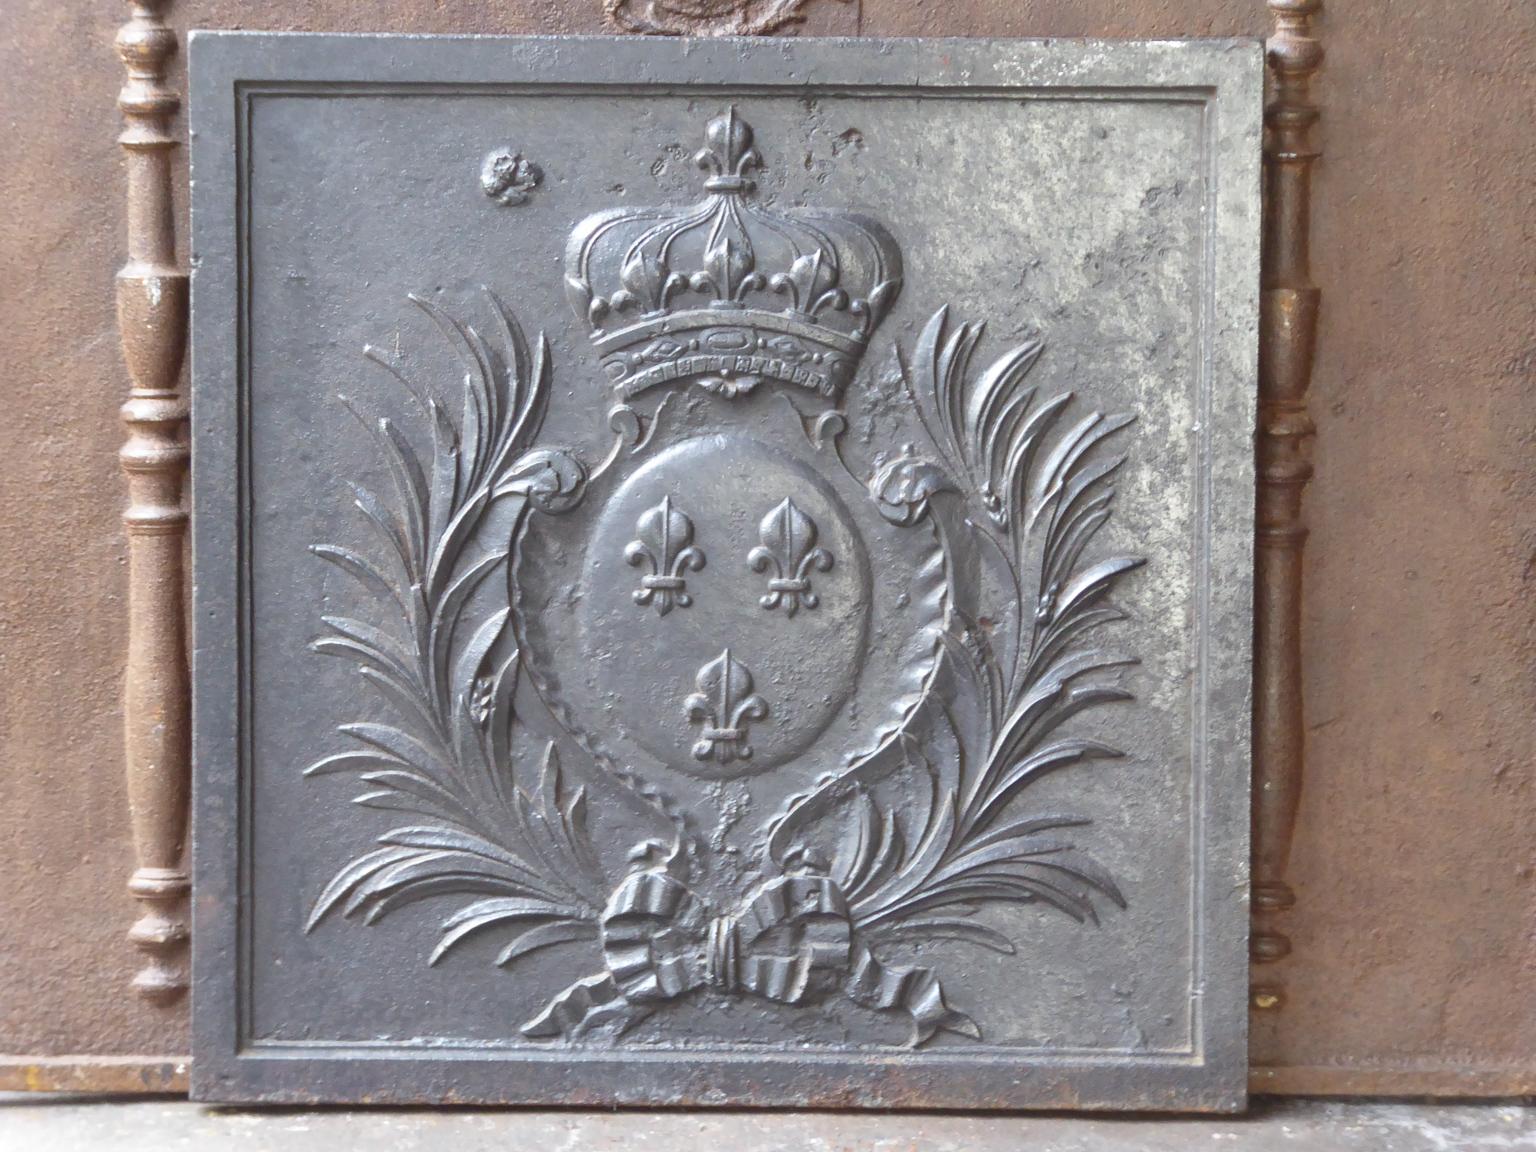 18th-19th century French fireback with the arms of France. This is the coat of arms of the House of Bourbon, an originally French royal house that became a major dynasty in Europe. It delivered kings for Spain (Navarra), France, both Sicilies and